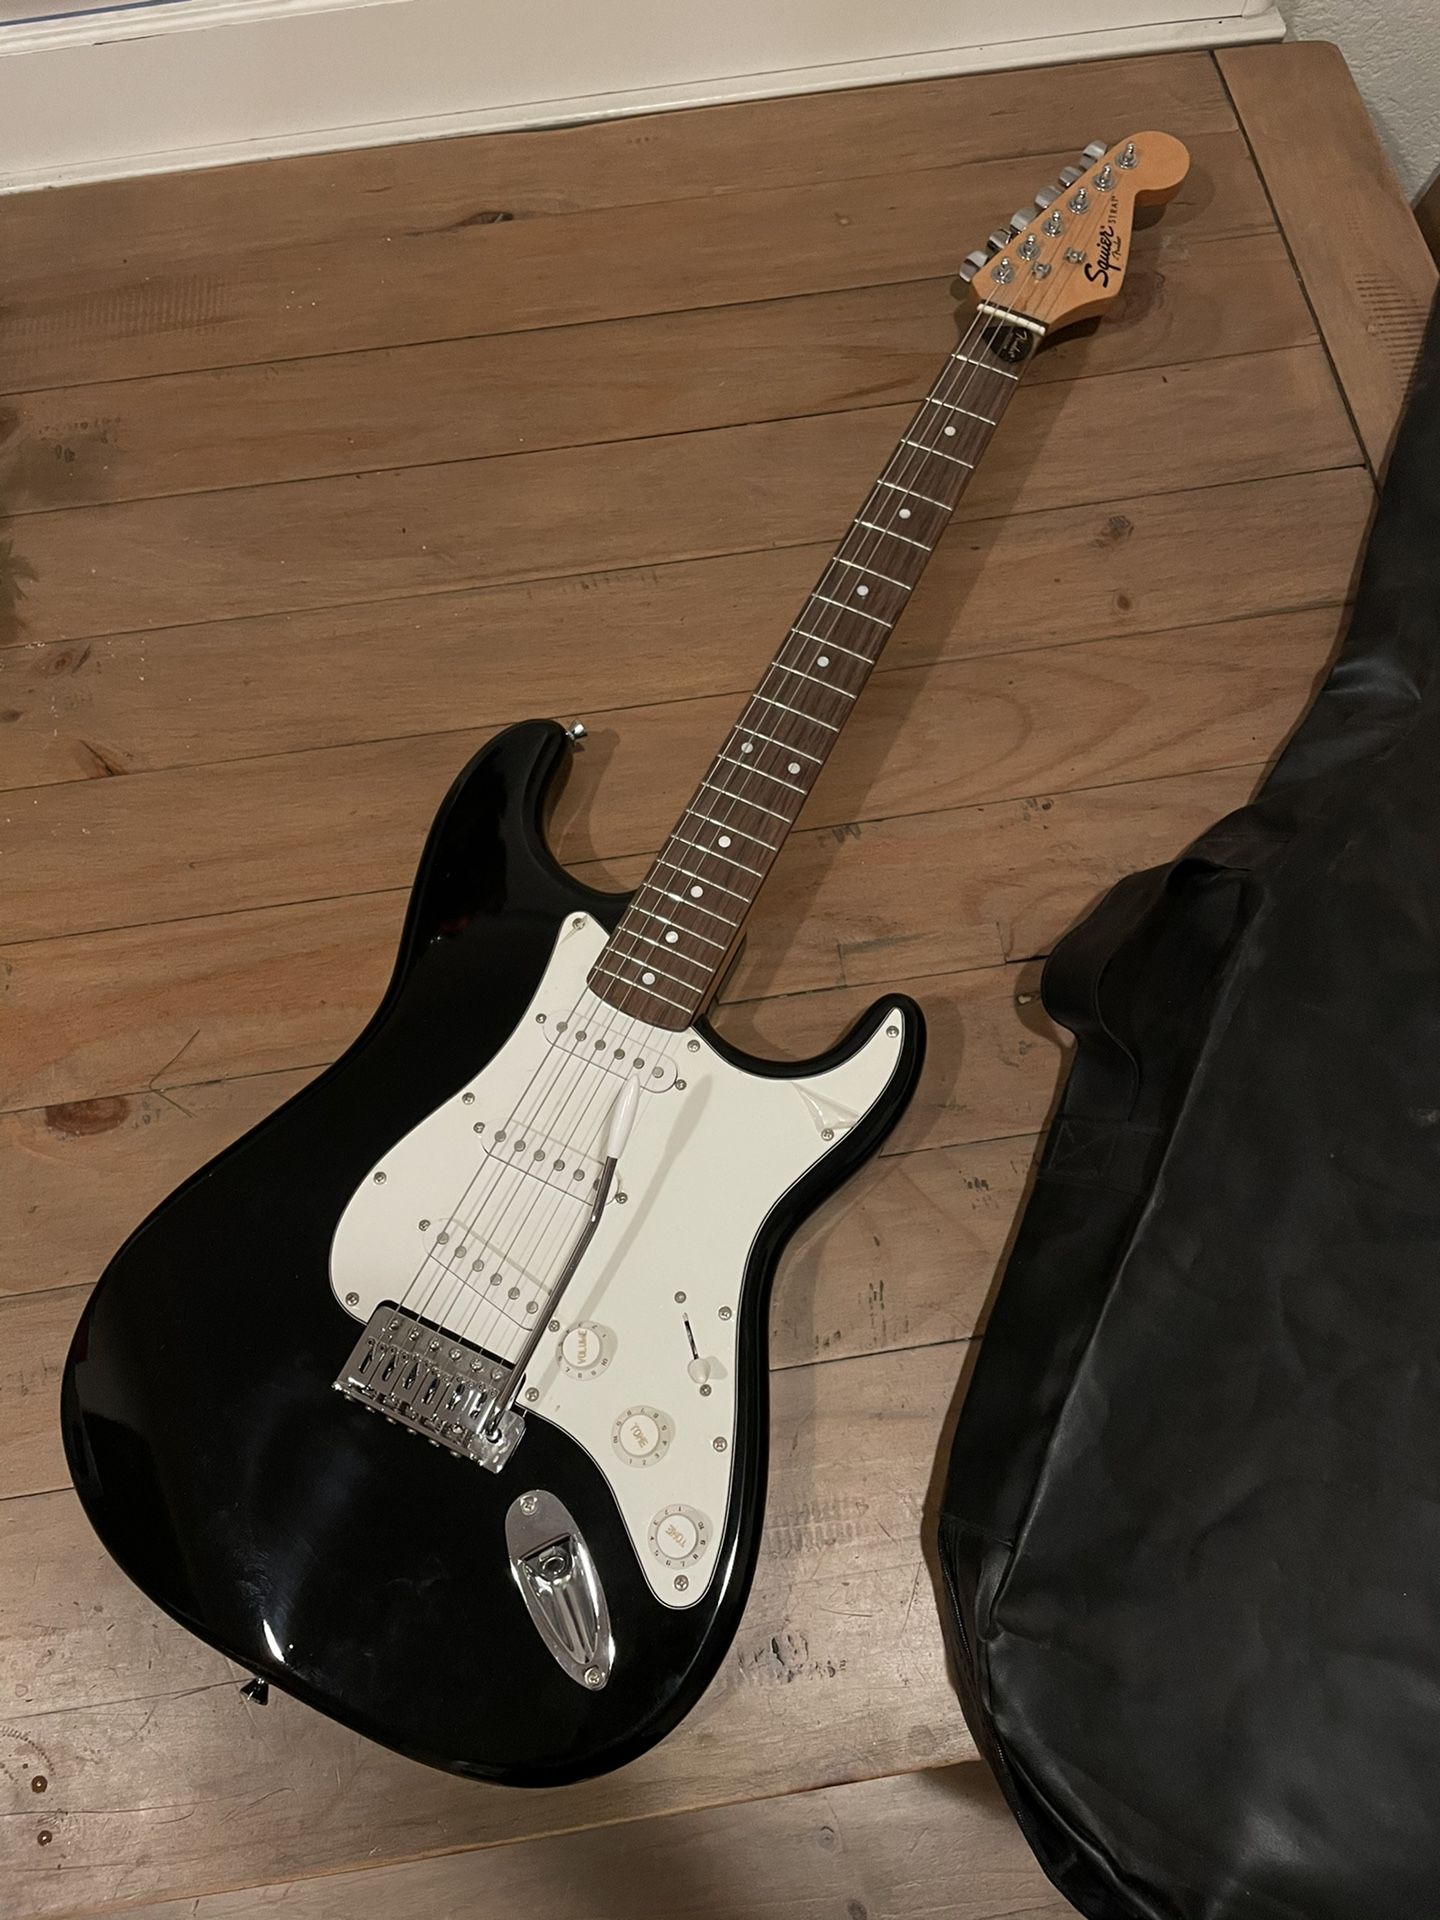 Squier Strat Special Edition Electric Guitar 5 String Black And White SE (Still has proactive clear layer)